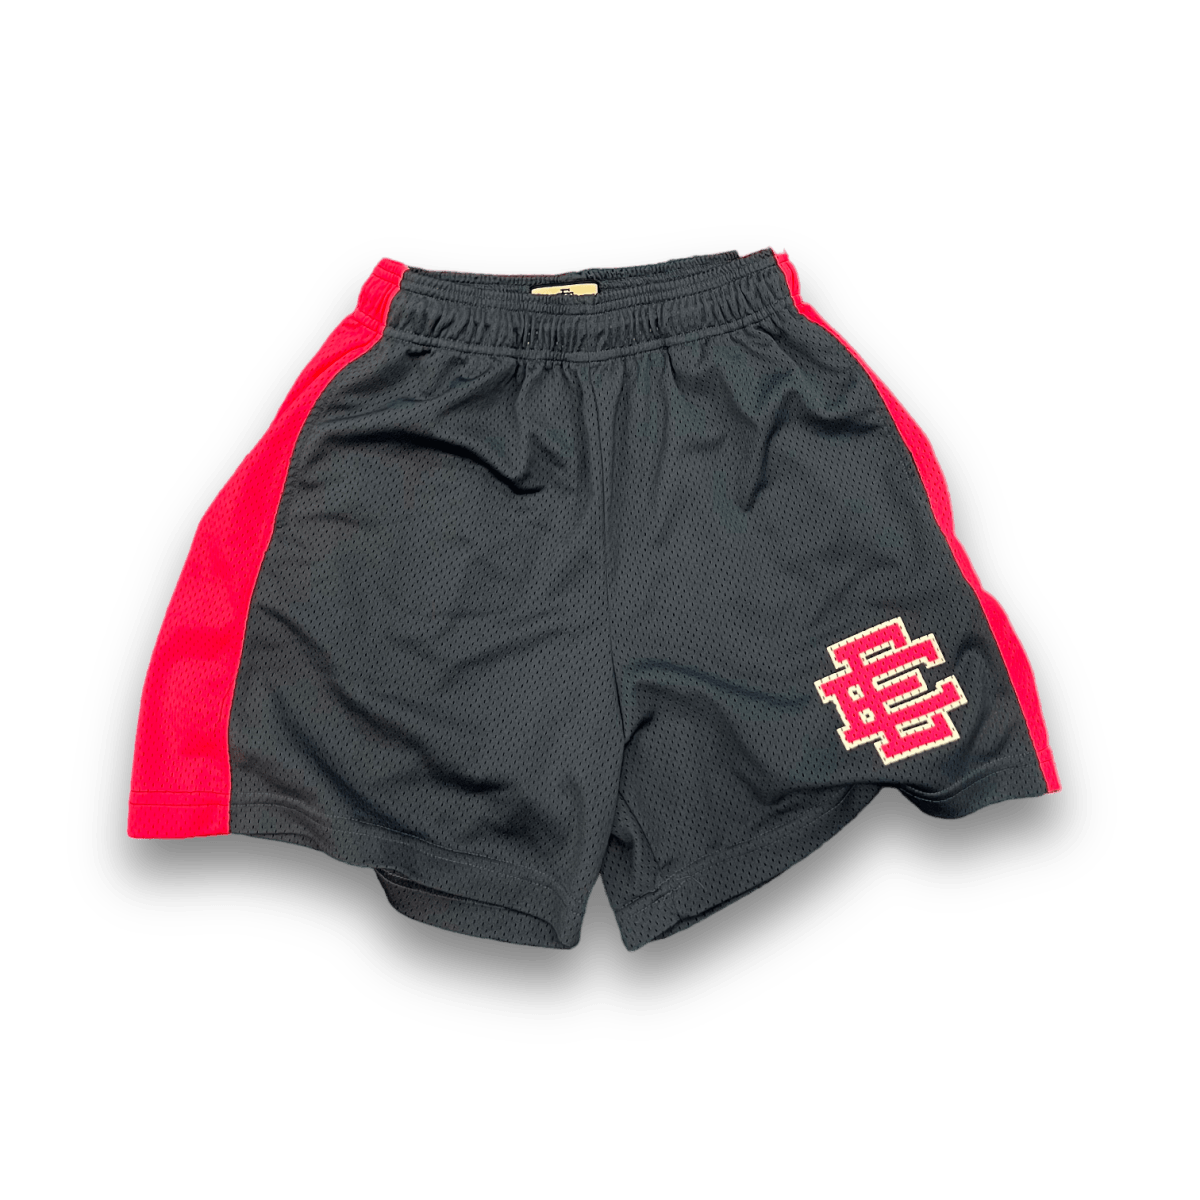 Eric Emanuel EE Shorts - Blue and Pink - Shorts - Jawns on Fire Sneakers & Streetwear